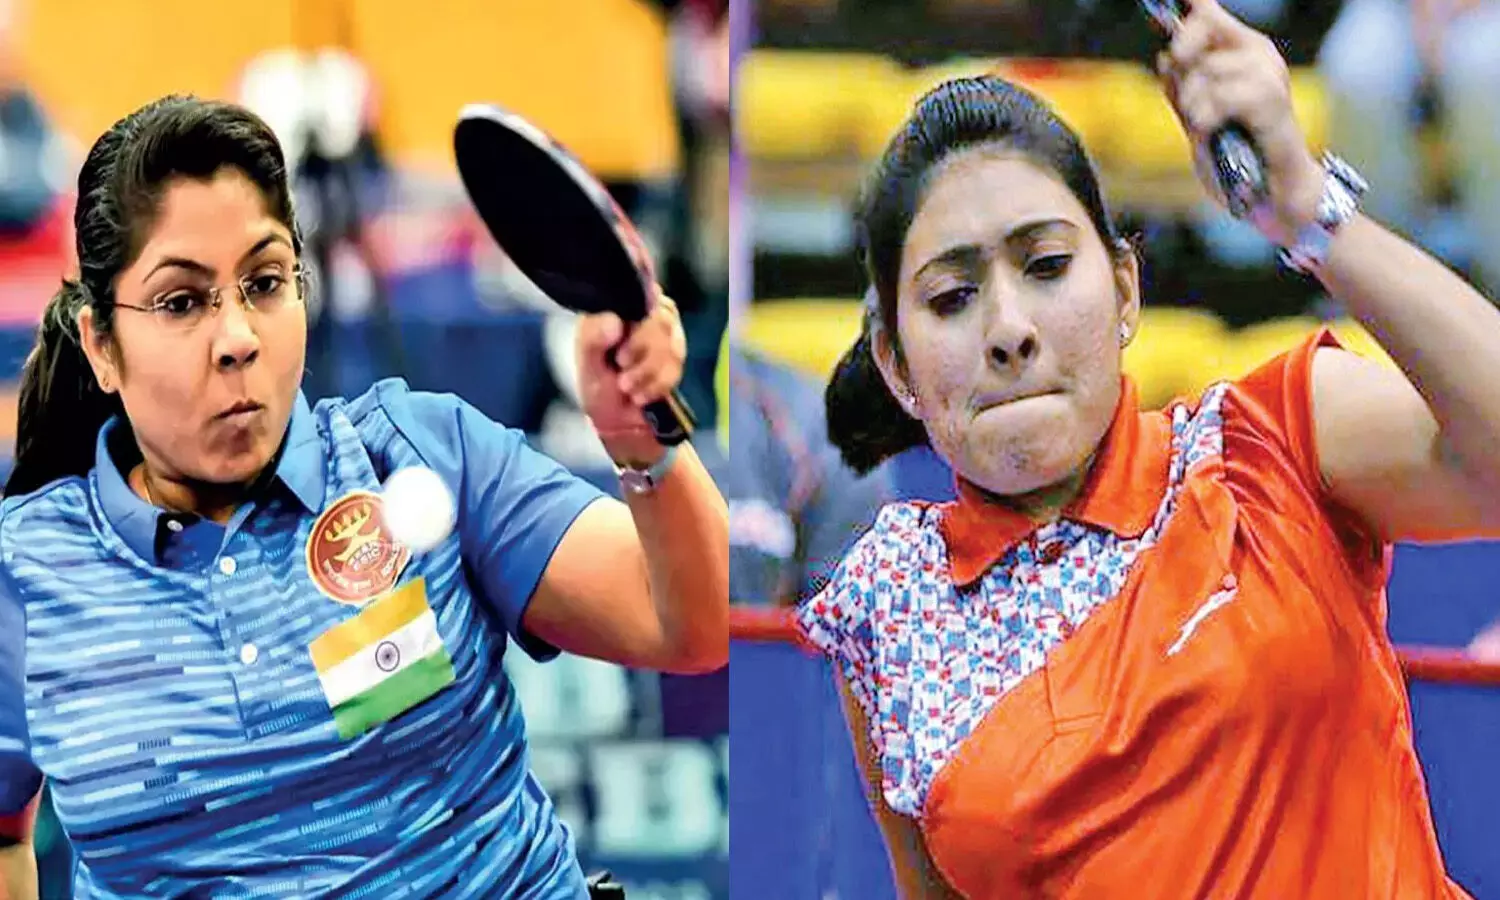 Tokyo Paralympics: Bhavina & Sonal Patel lose their first Table Tennis match